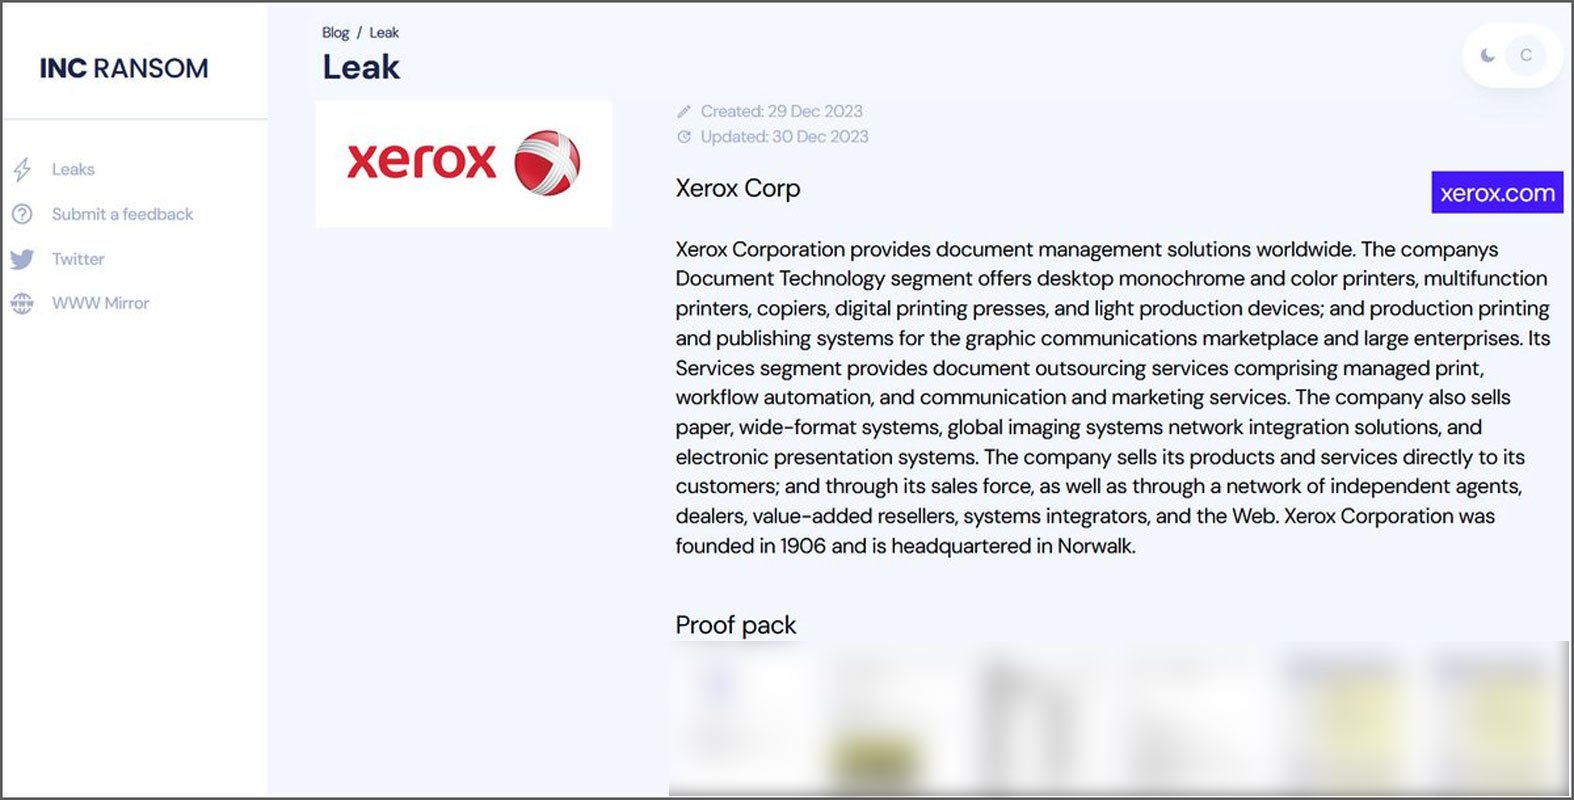 Xerox listed on the INC Ransom data leak site